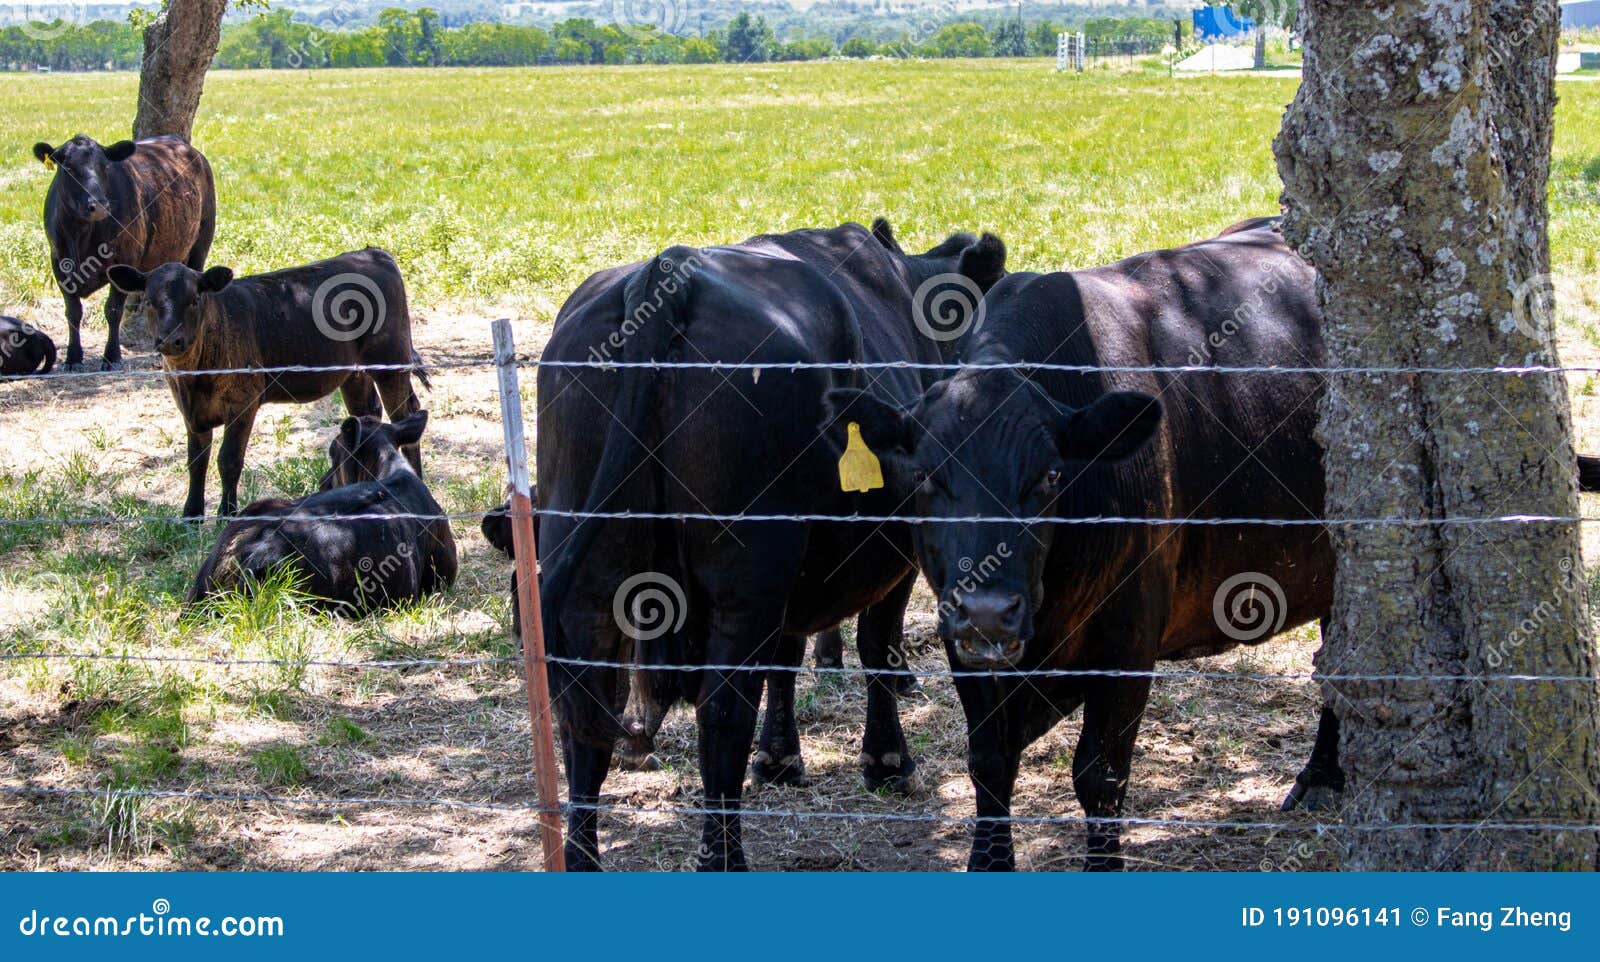 grass fed cows with number tags in justin texas